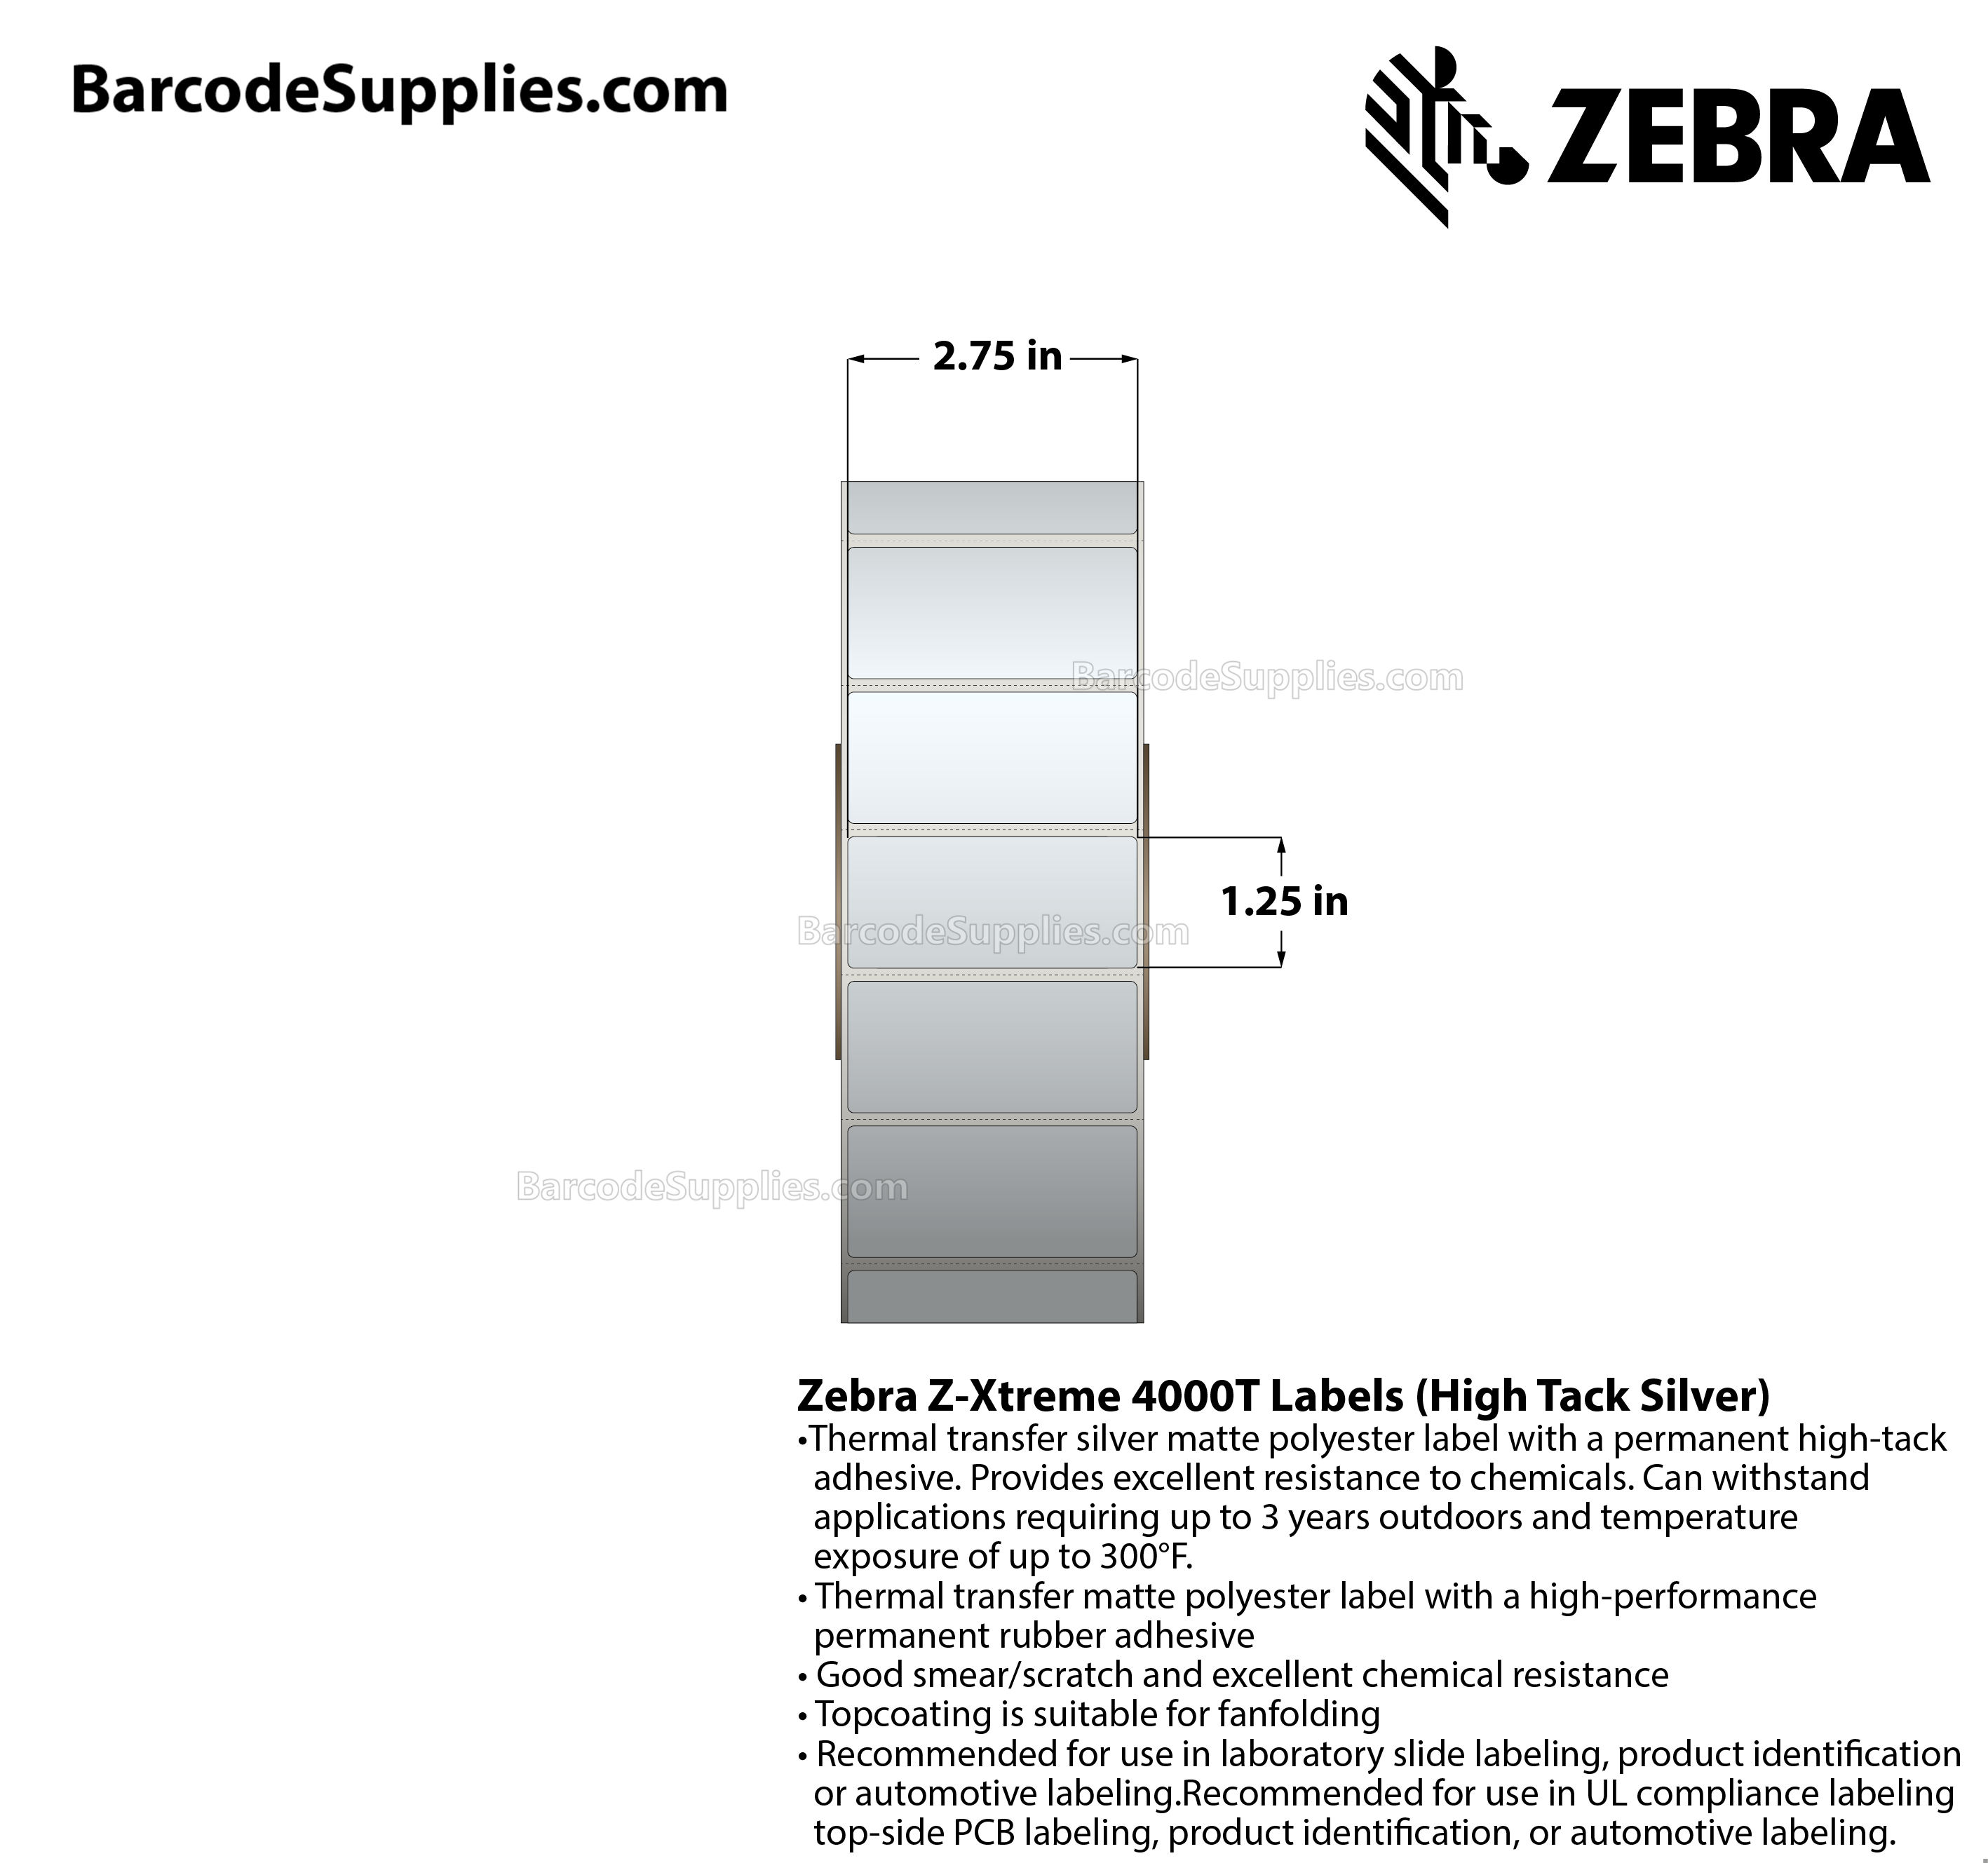 2.75 x 1.25 Thermal Transfer Silver Z-Xtreme 4000T High-Tack Silver Labels With High-tack Adhesive - Perforated - 3000 Labels Per Roll - Carton Of 1 Rolls - 3000 Labels Total - MPN: 10023177